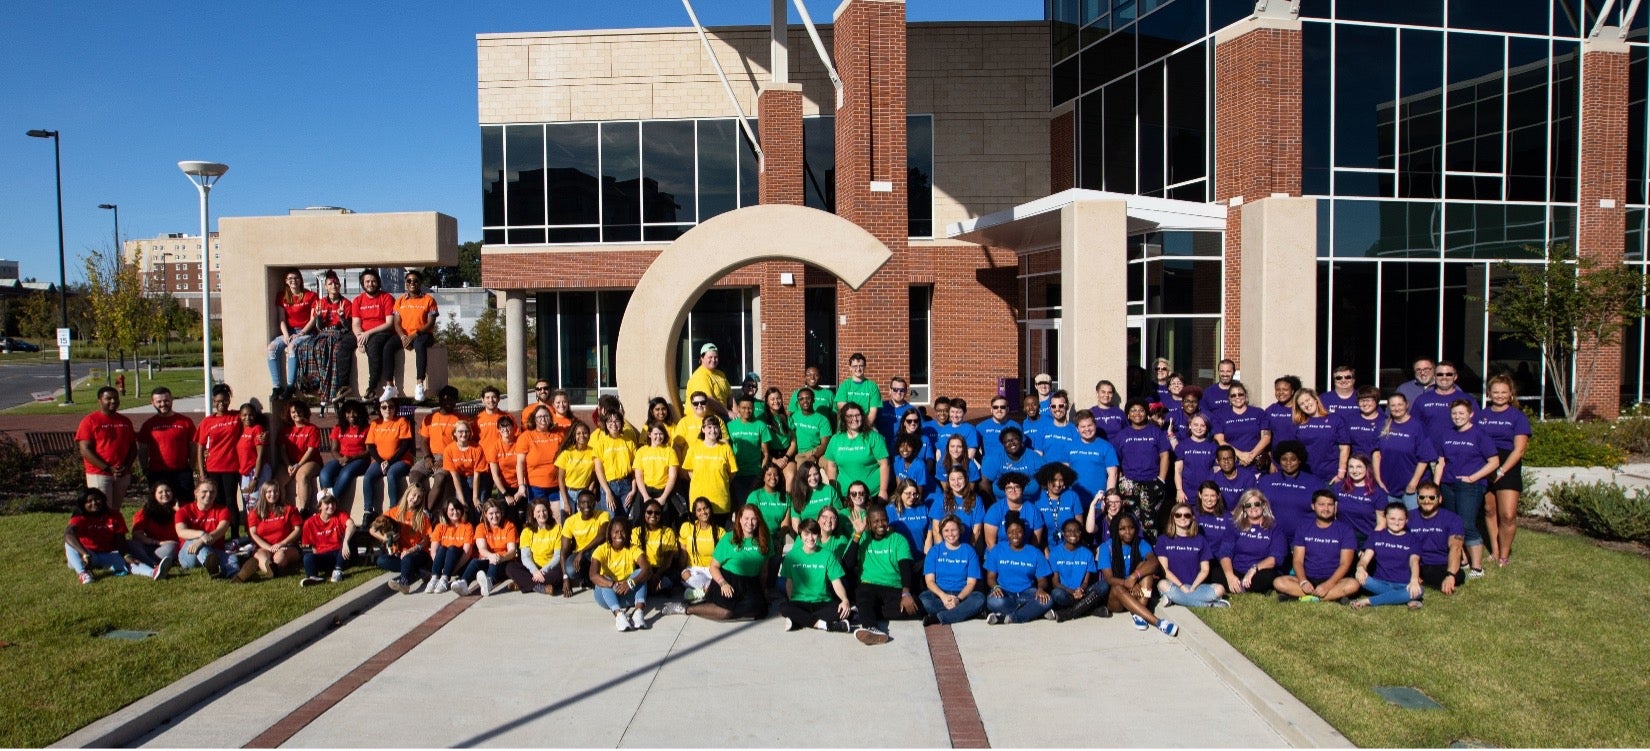 Students in rainbow colored shirts standing outside Main Campus Student Center